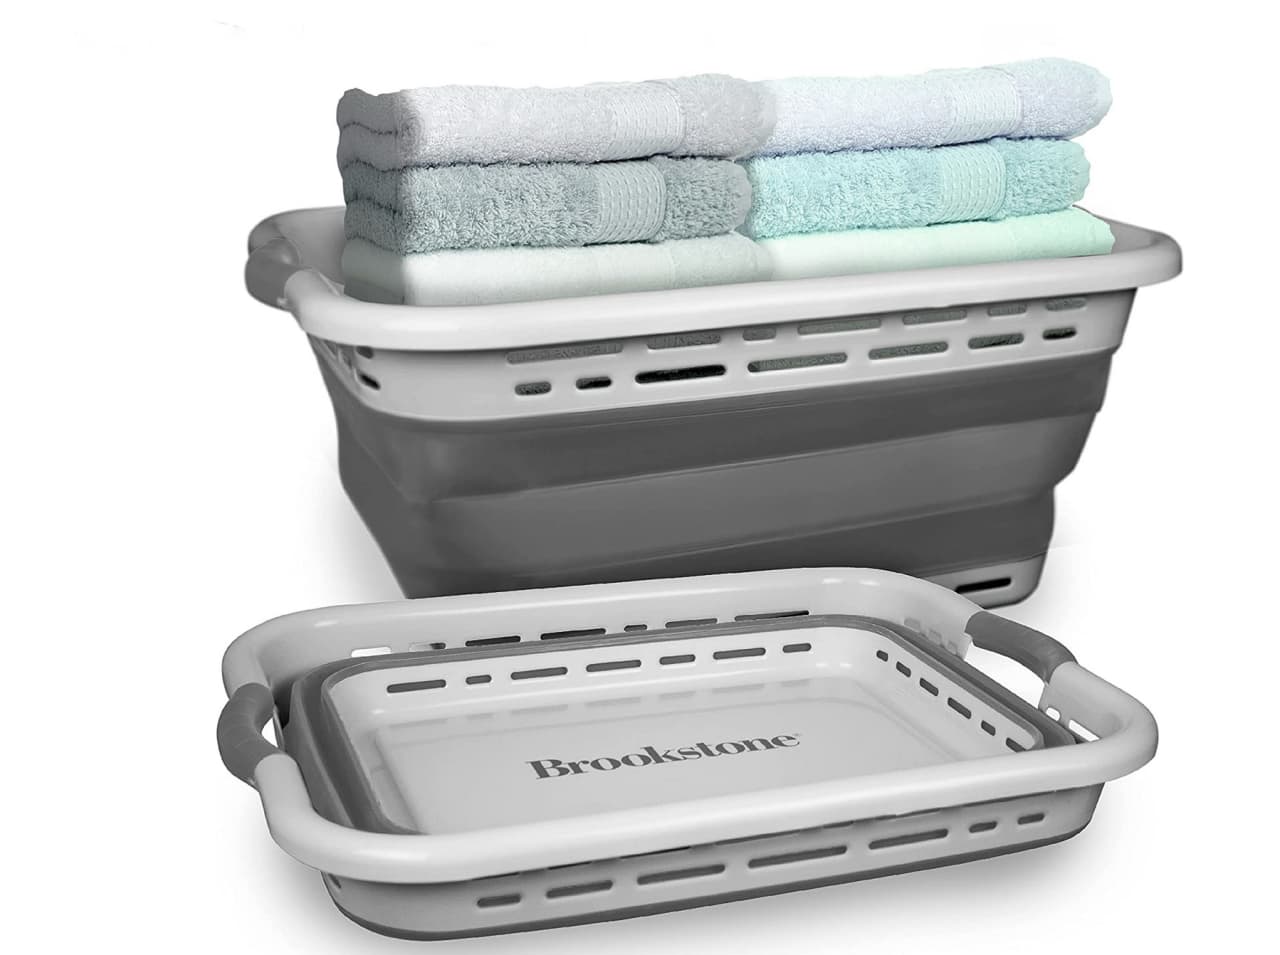 18 Best Laundry Baskets, According to Cleaning Experts - Buy Side from WSJ